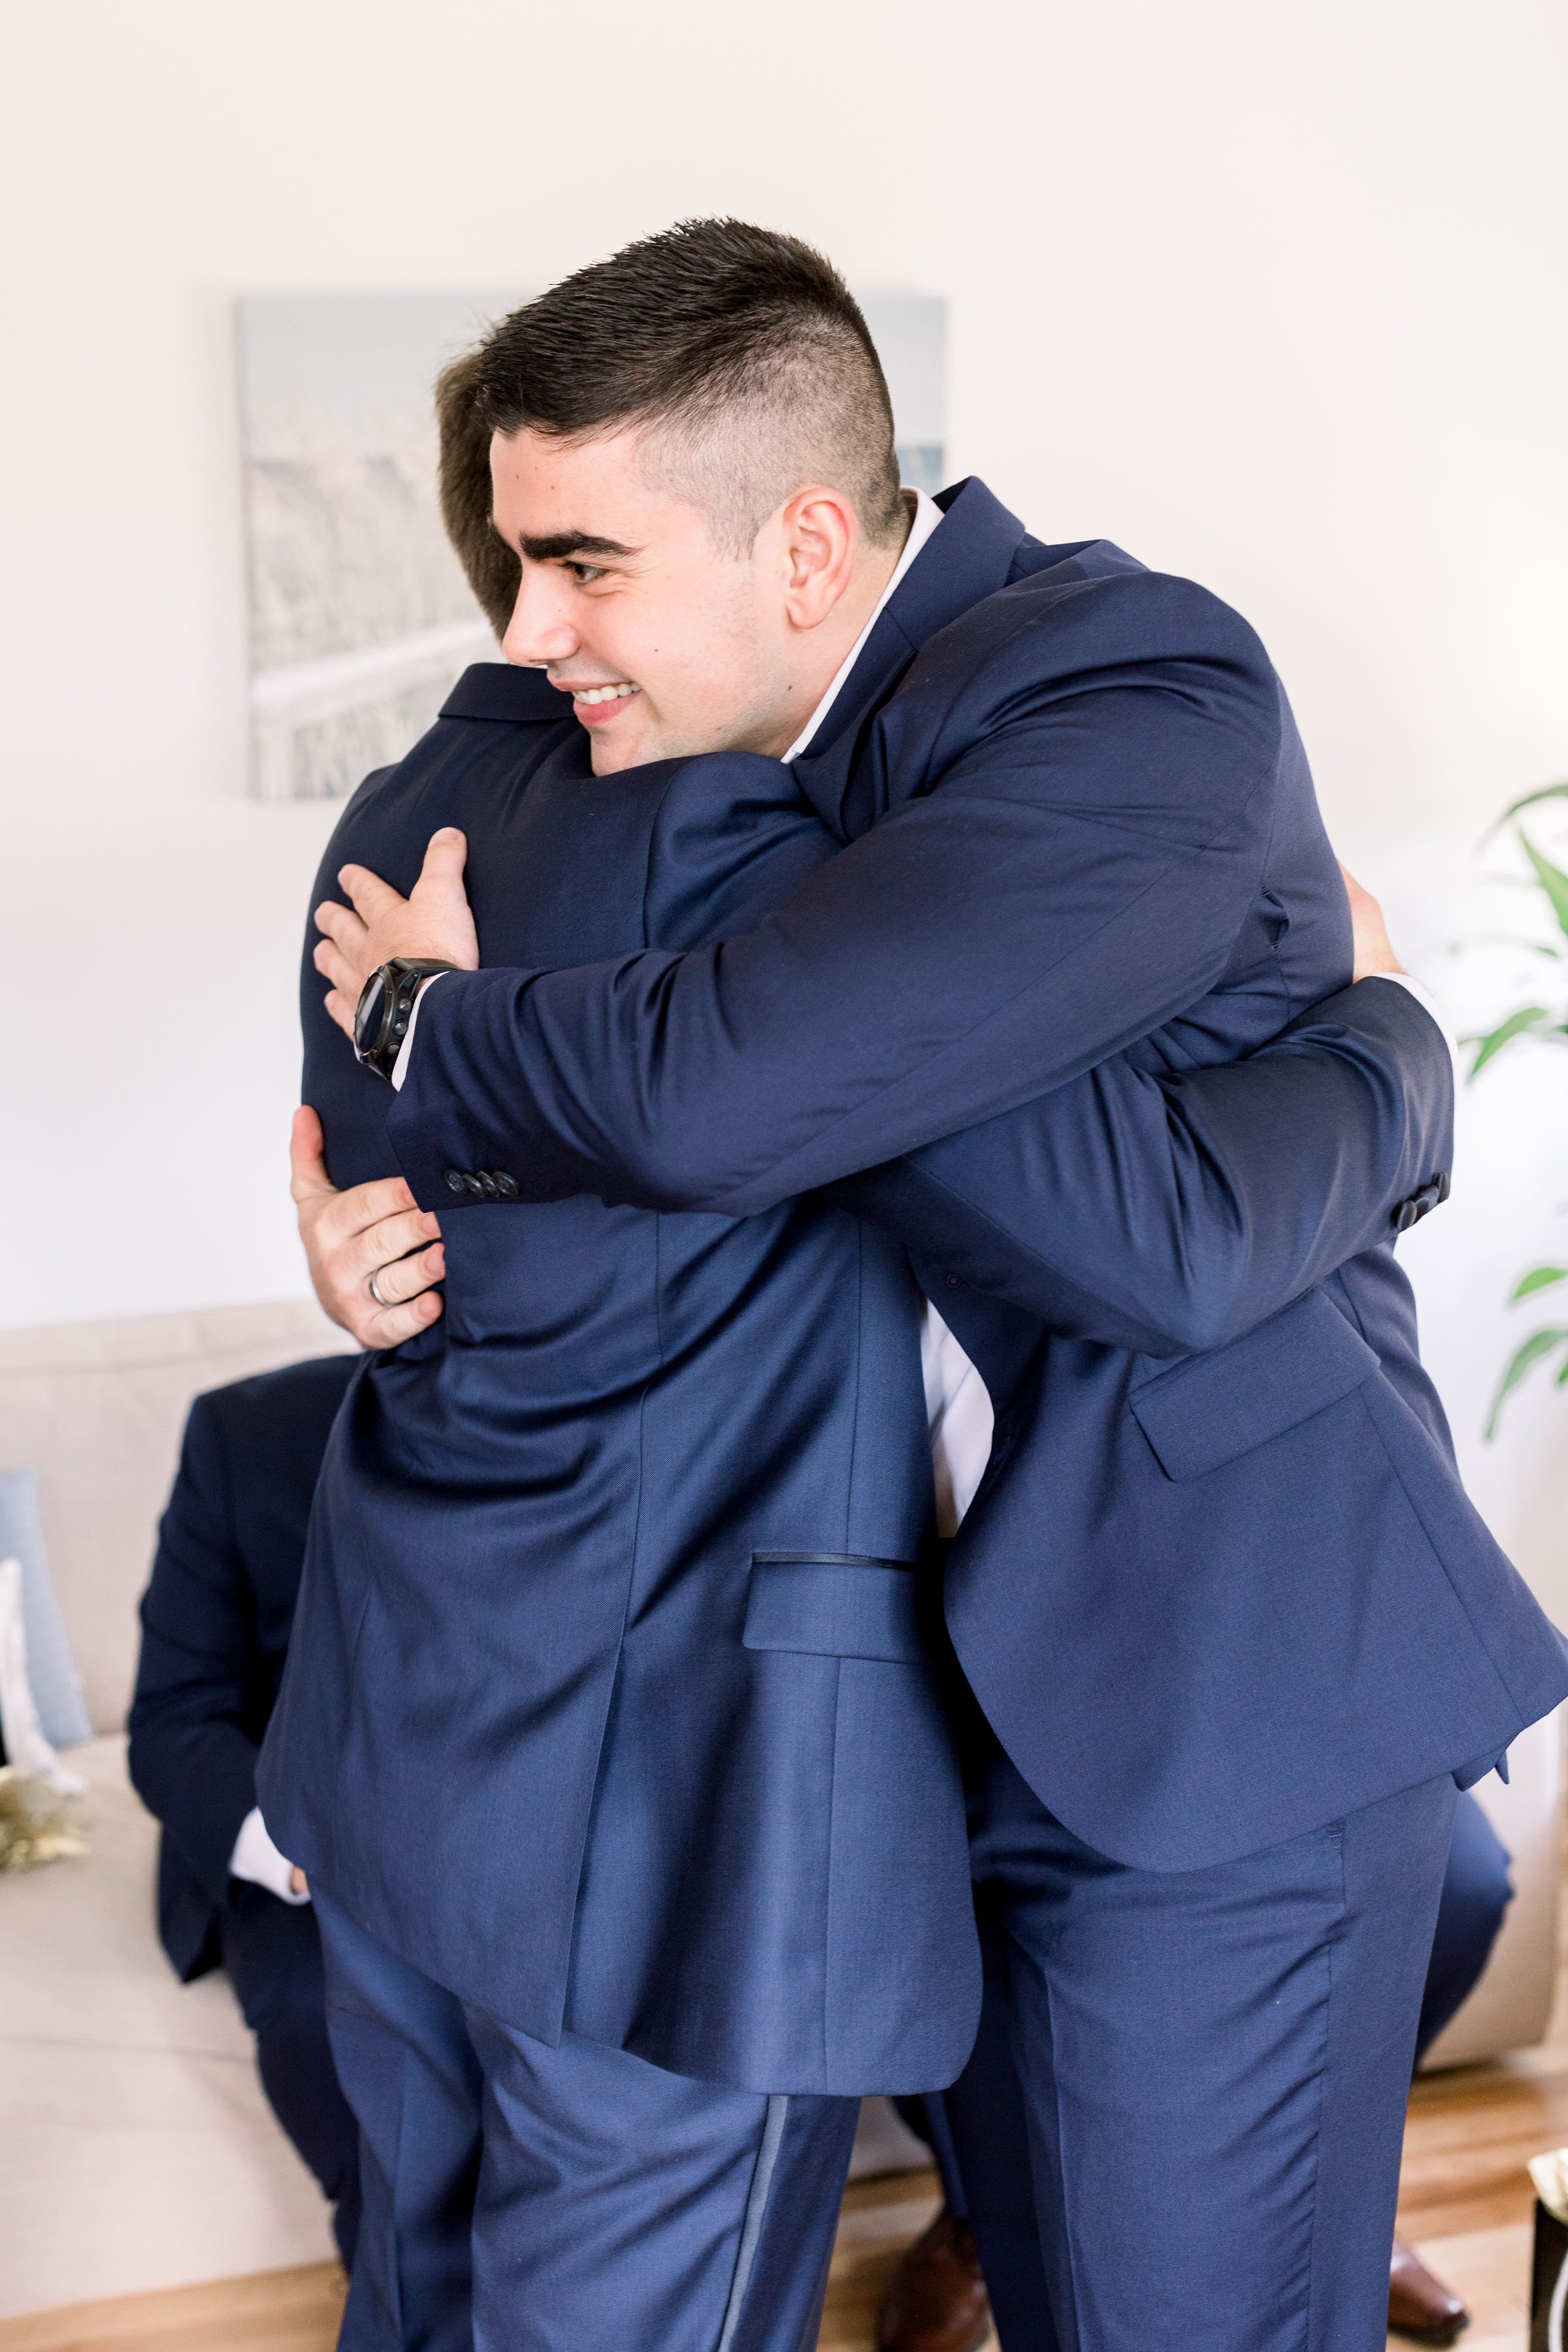  A groom hugs the best man before the wedding by Chelsea Mason PHotography in Almonte, Ontario. best man and groom blue suits #Chelseamasonphotography #Chelseamasonweddings #Onatarioweddings #EvermoreweddingsAlmonte #Ontarioweddingphotographers 